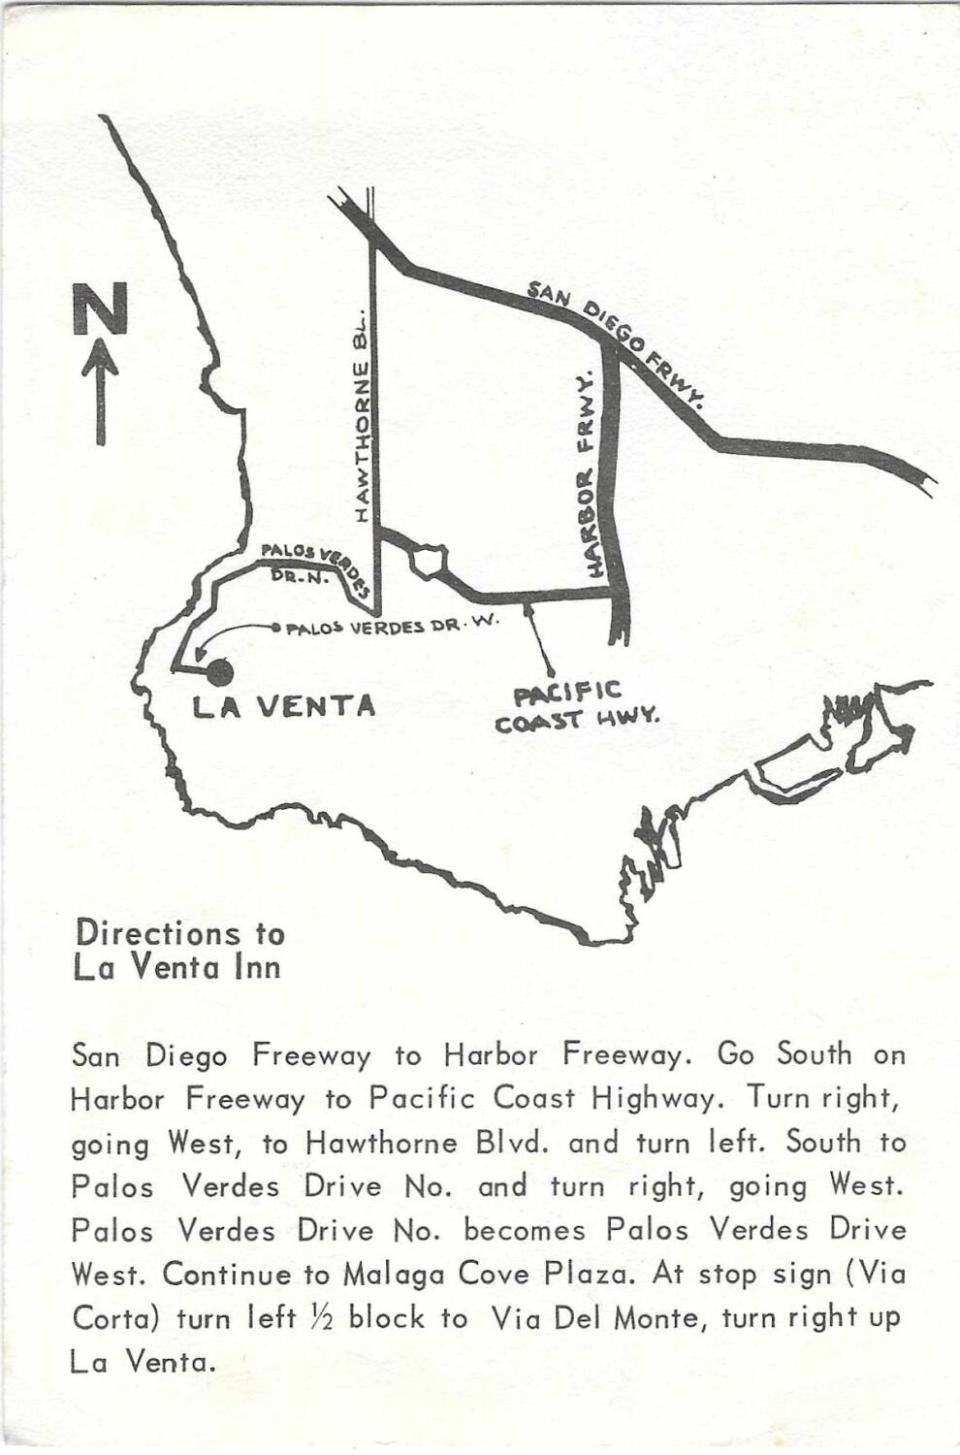 Map of Palos Verdes Peninsula, South Bay and port area, with written directions to La Venta Inn